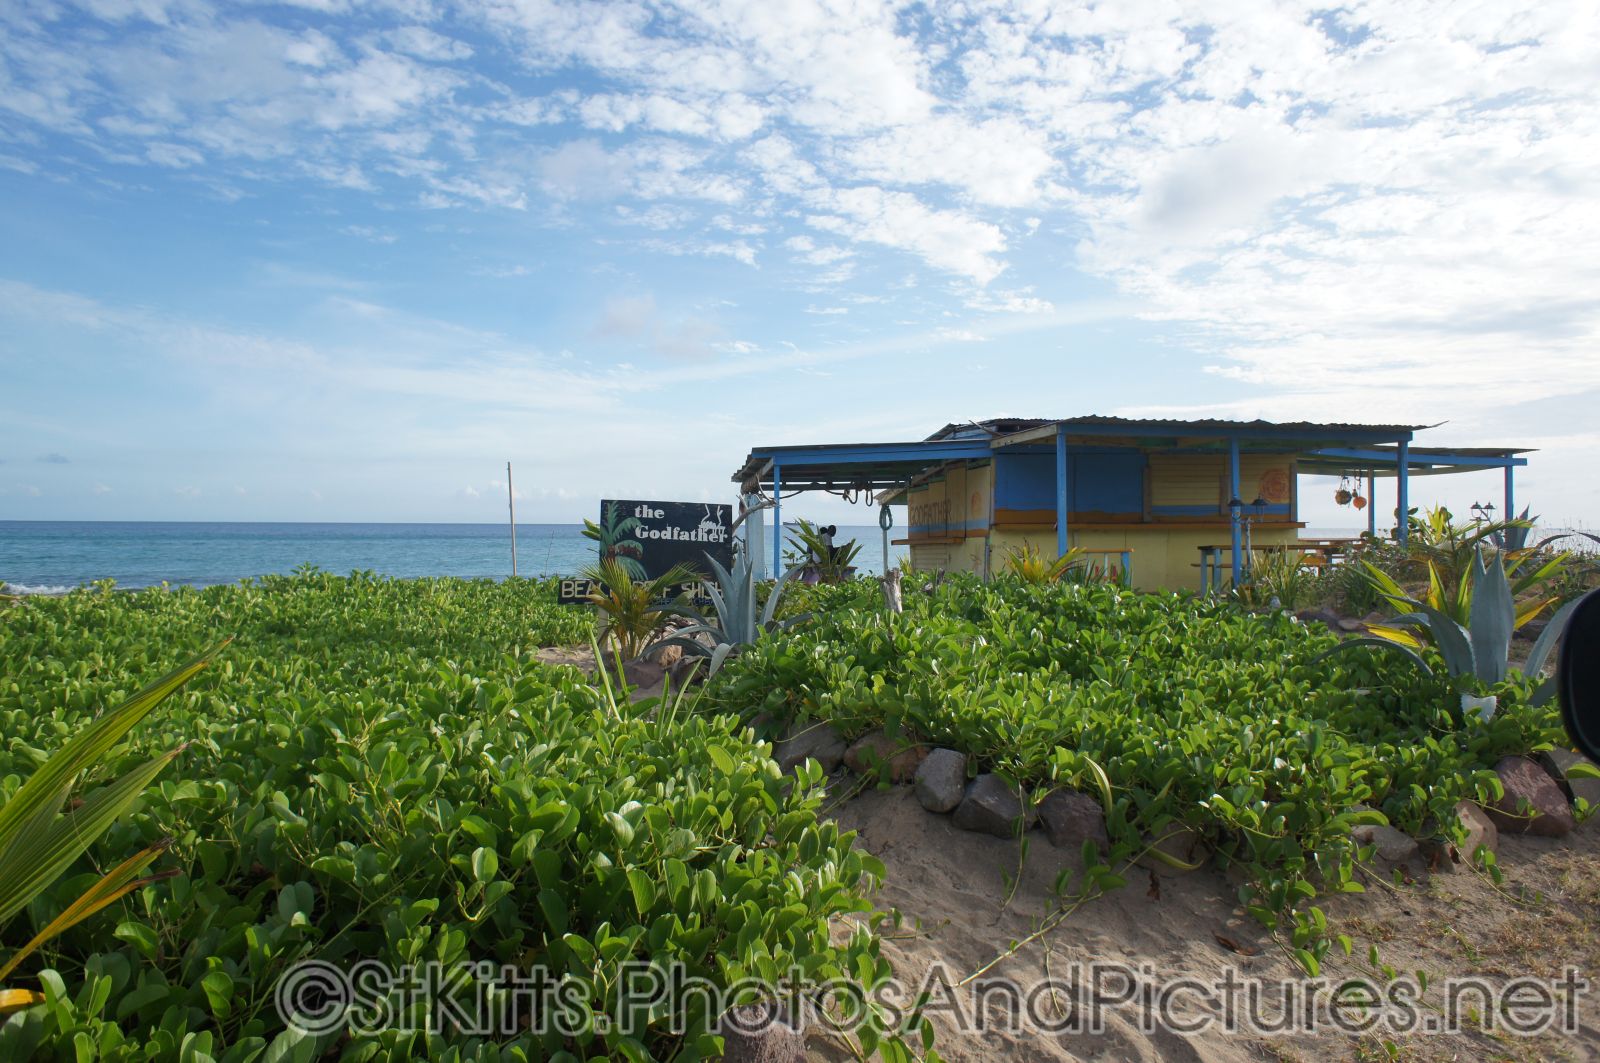 The Godfather Bar & Grill at St Kitts.jpg
